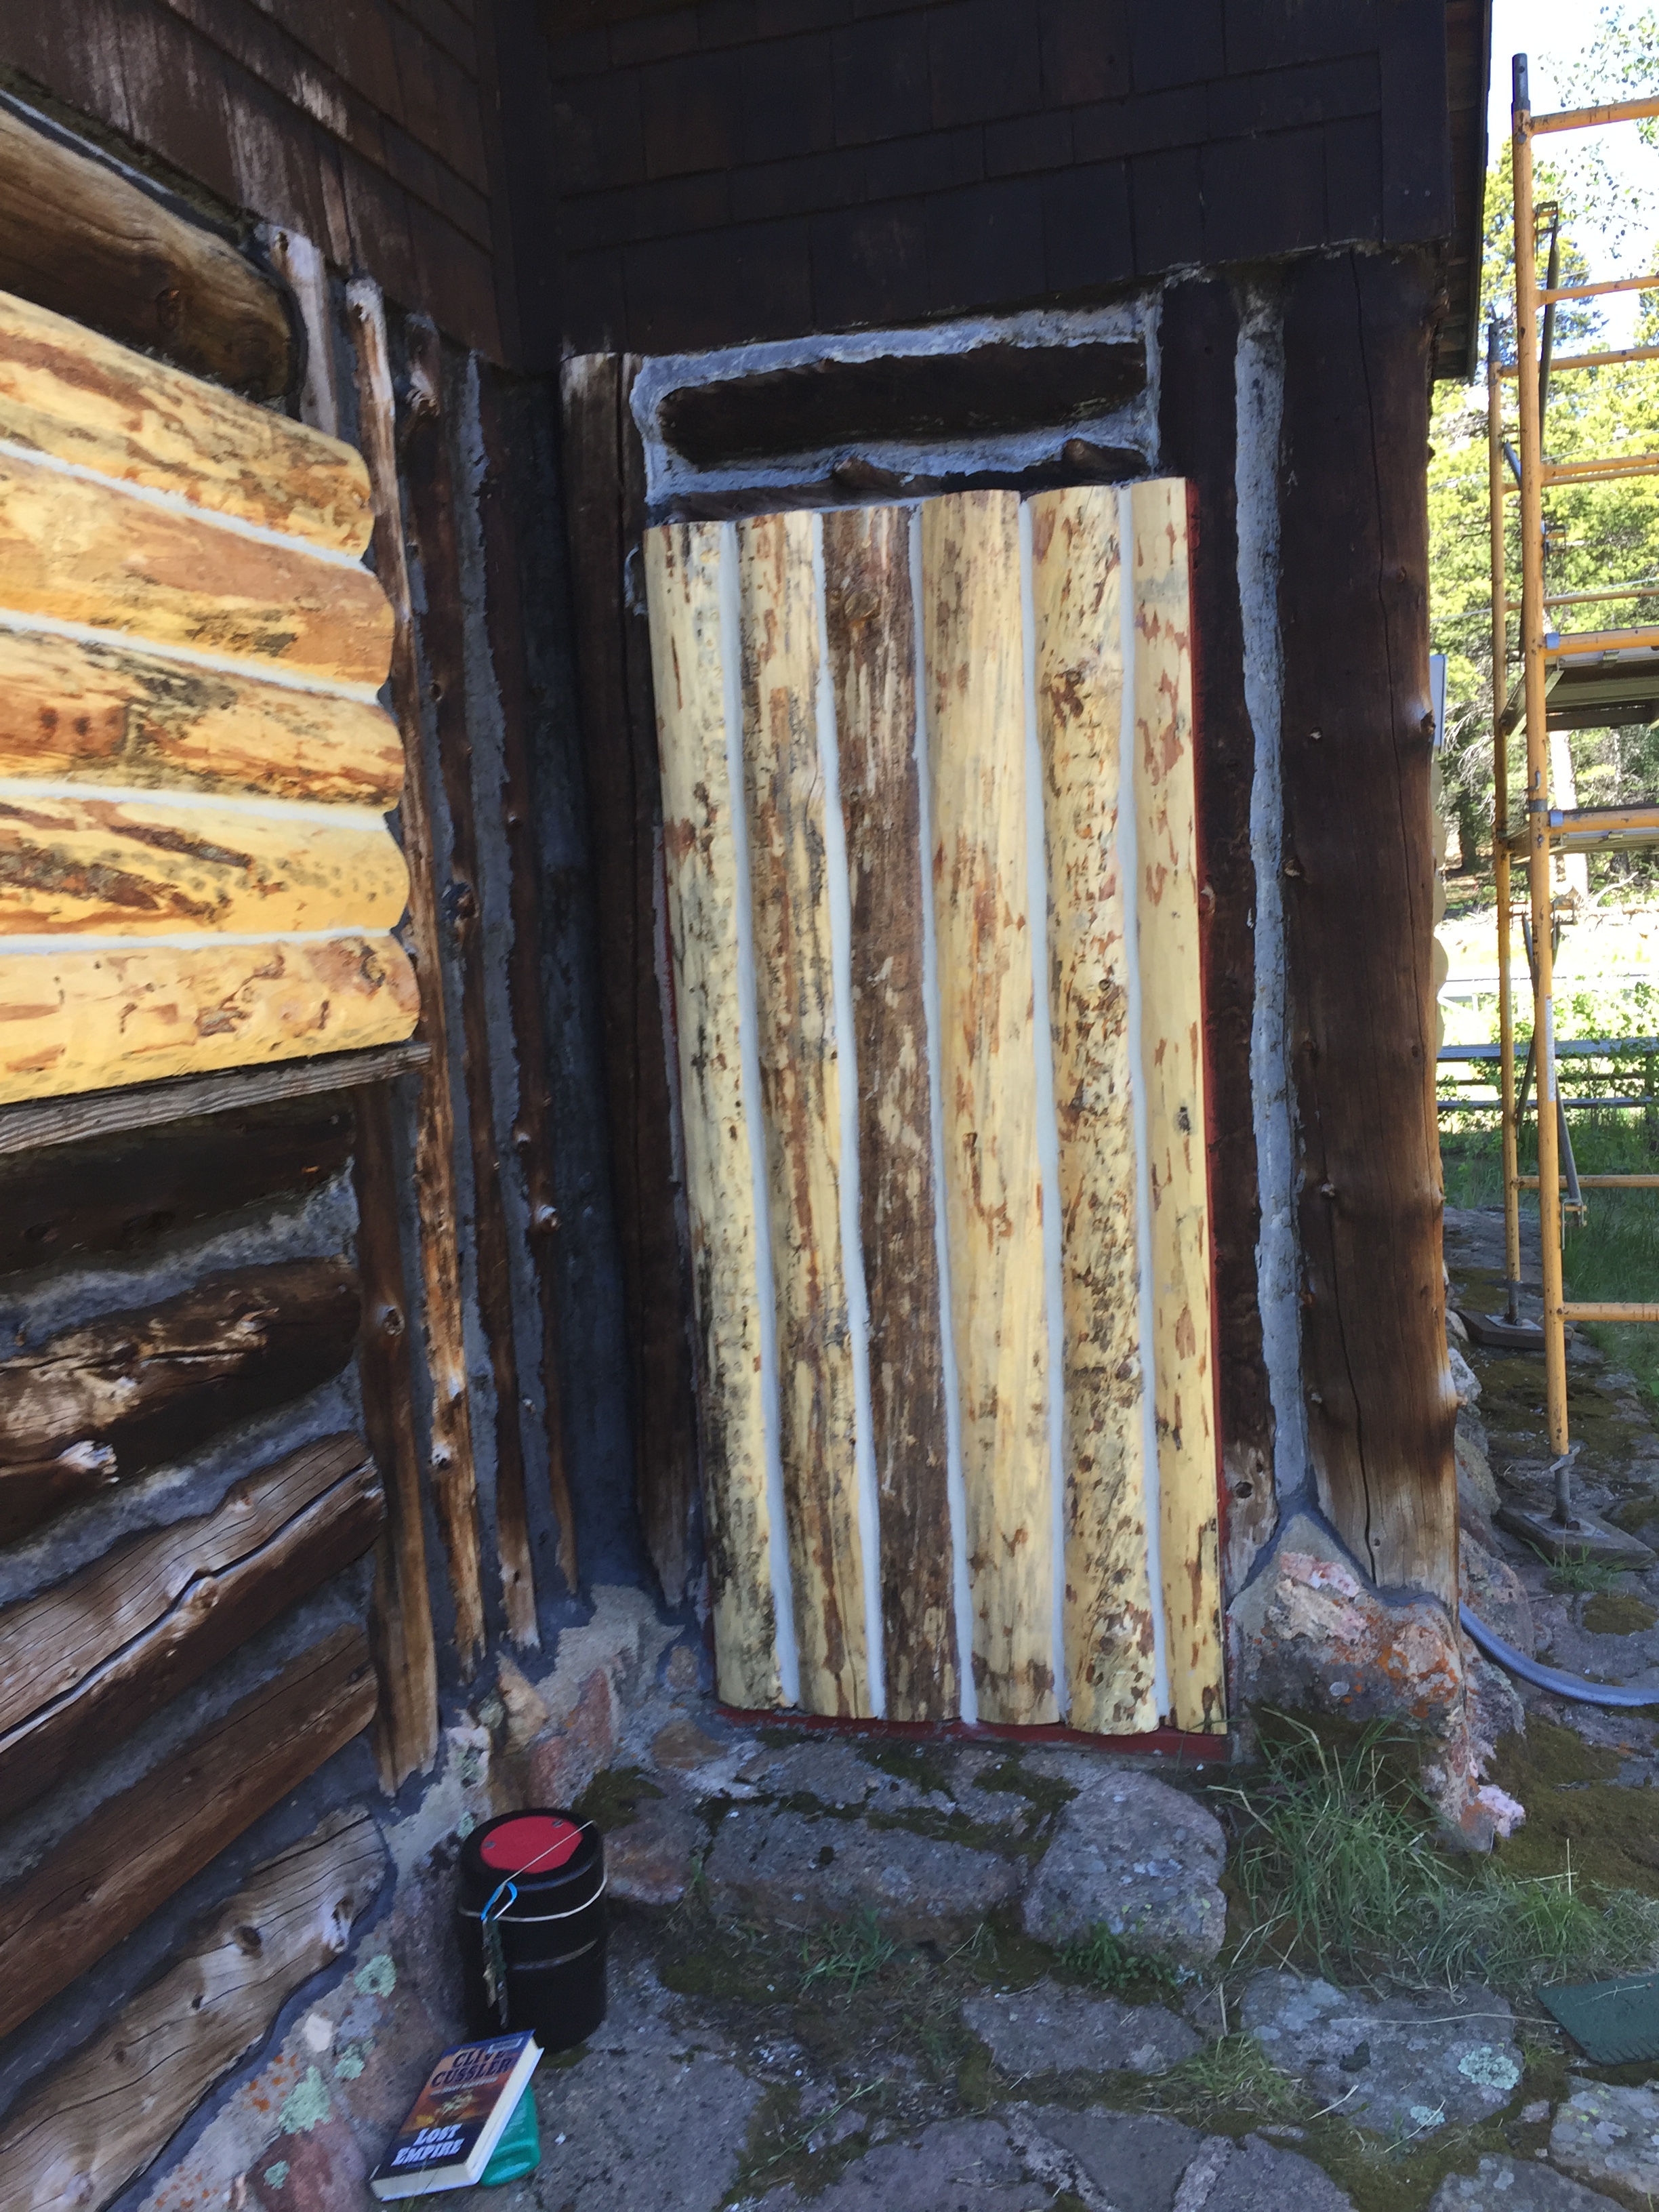 Worn wooden door propped against a log cabin